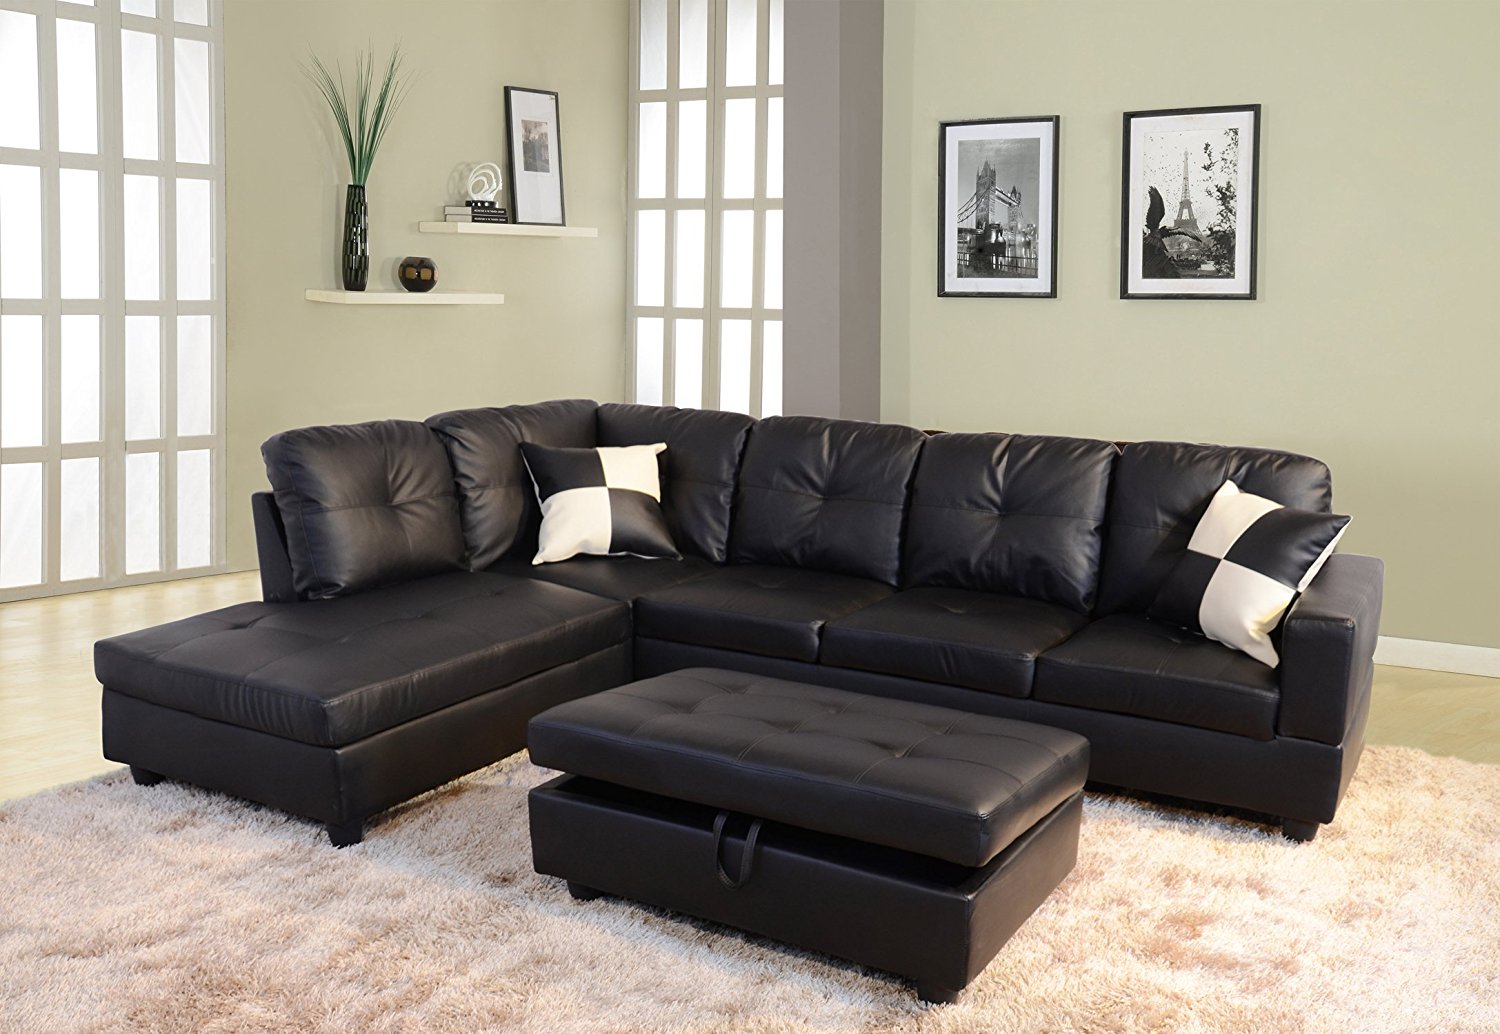 LifeStyle 3 Piece, Faux Leather Right-facing Sectional Sofa Set with Storage Ottoman,2 Square Pillows, Black